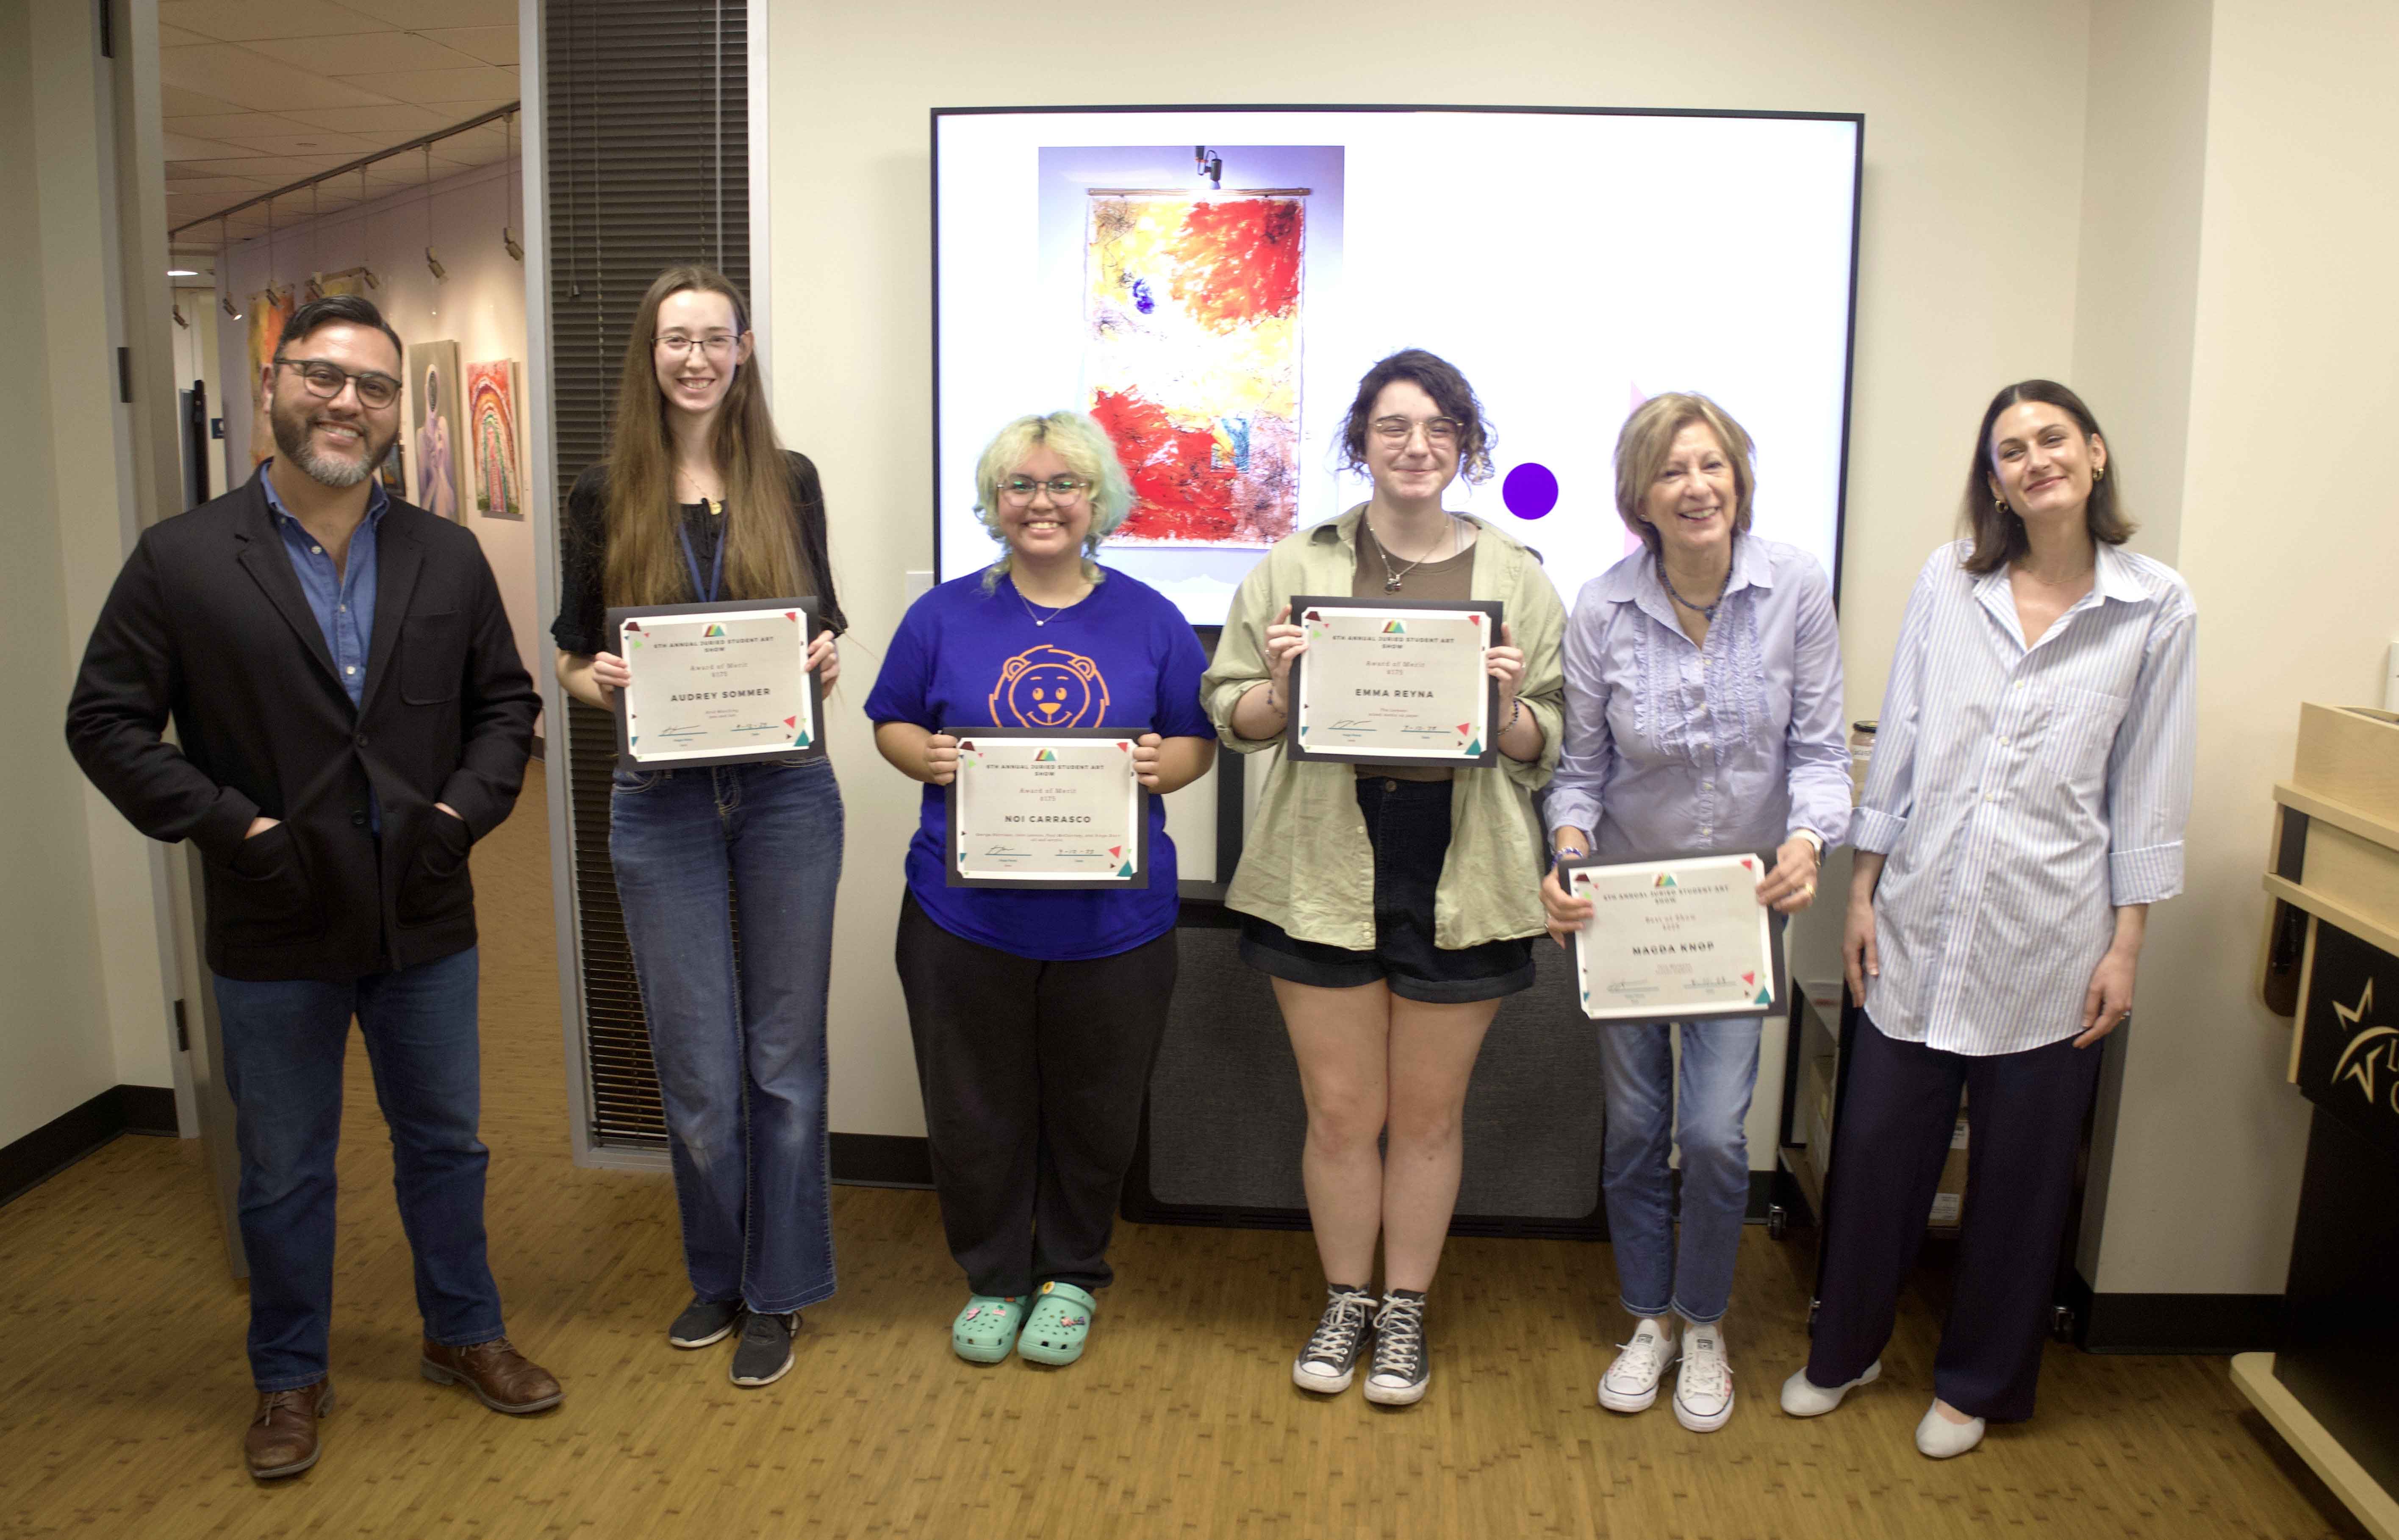 4 student award of merit winners with plaque and 2 art instructors